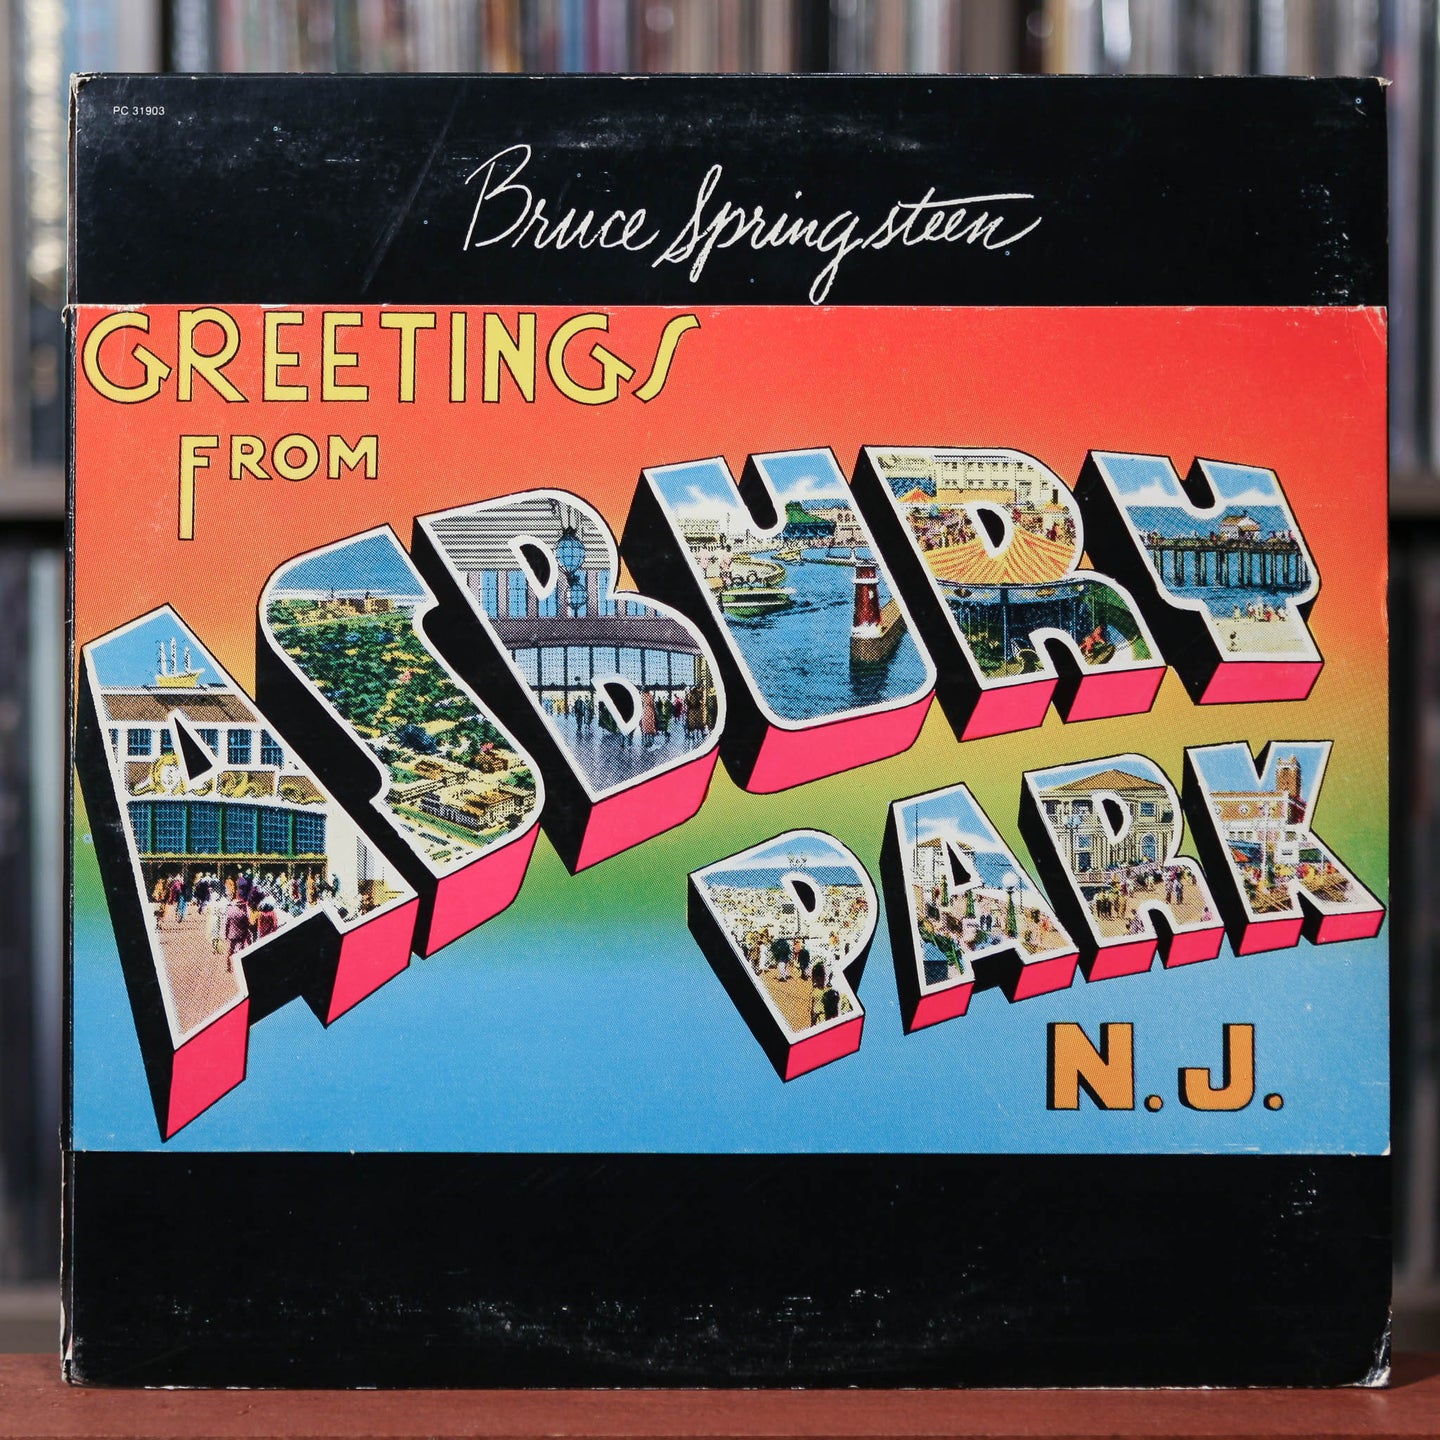 Bruce Springsteen - Greetings From Asbury Park  - 1973 Columbia, VG+/VG+